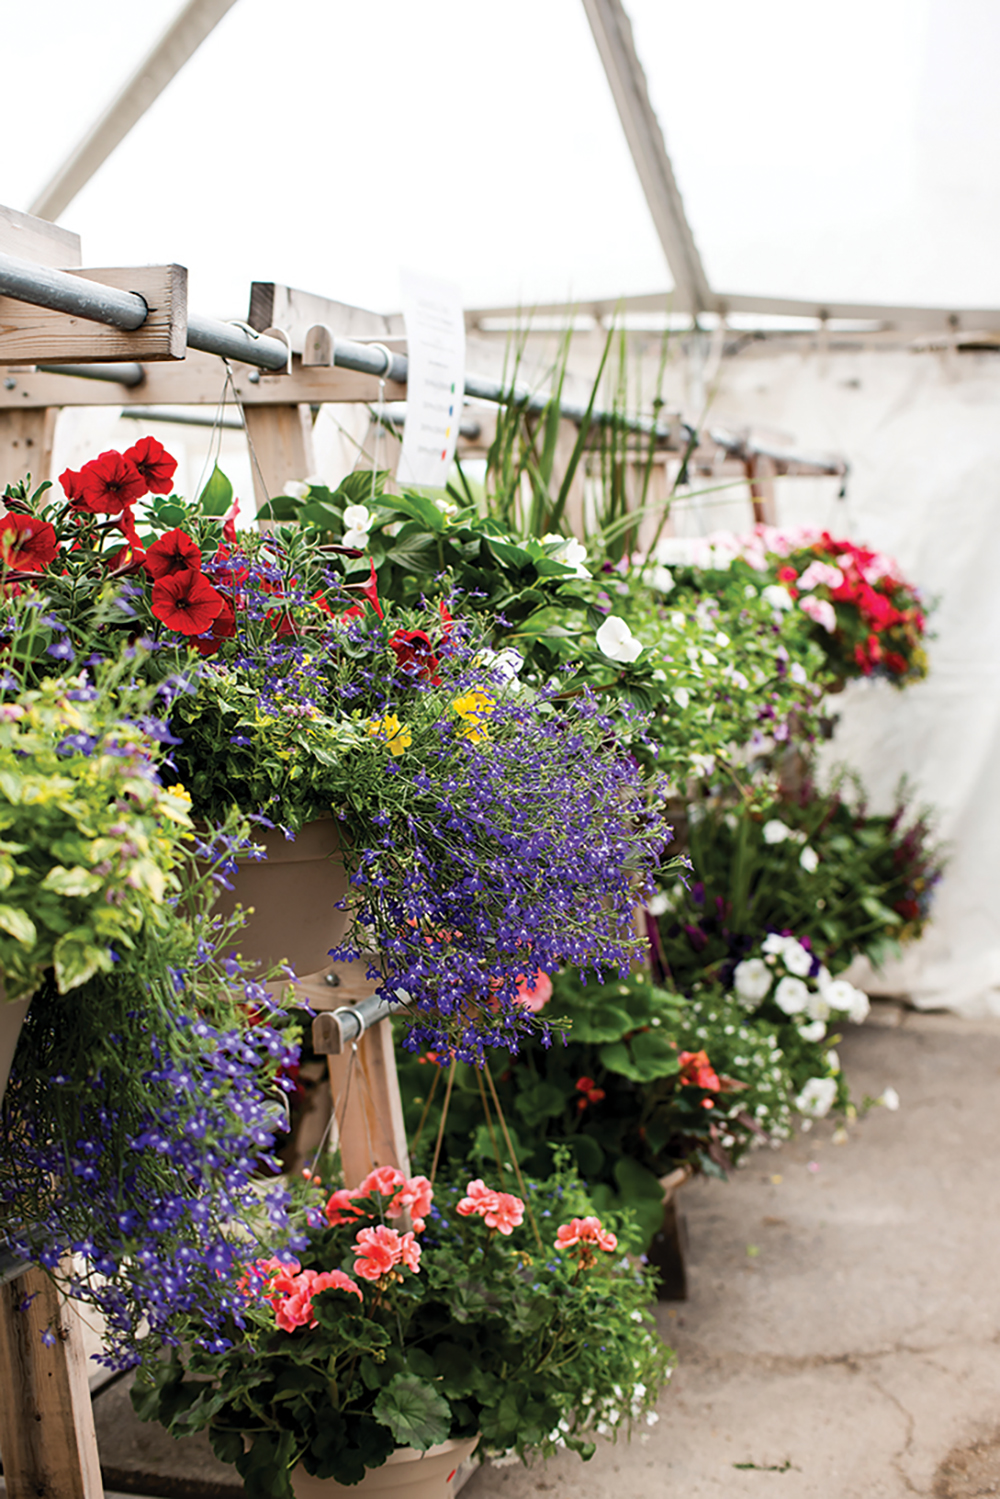 This spring saw the addition of an outdoor tent offering a variety of flowers and plants.